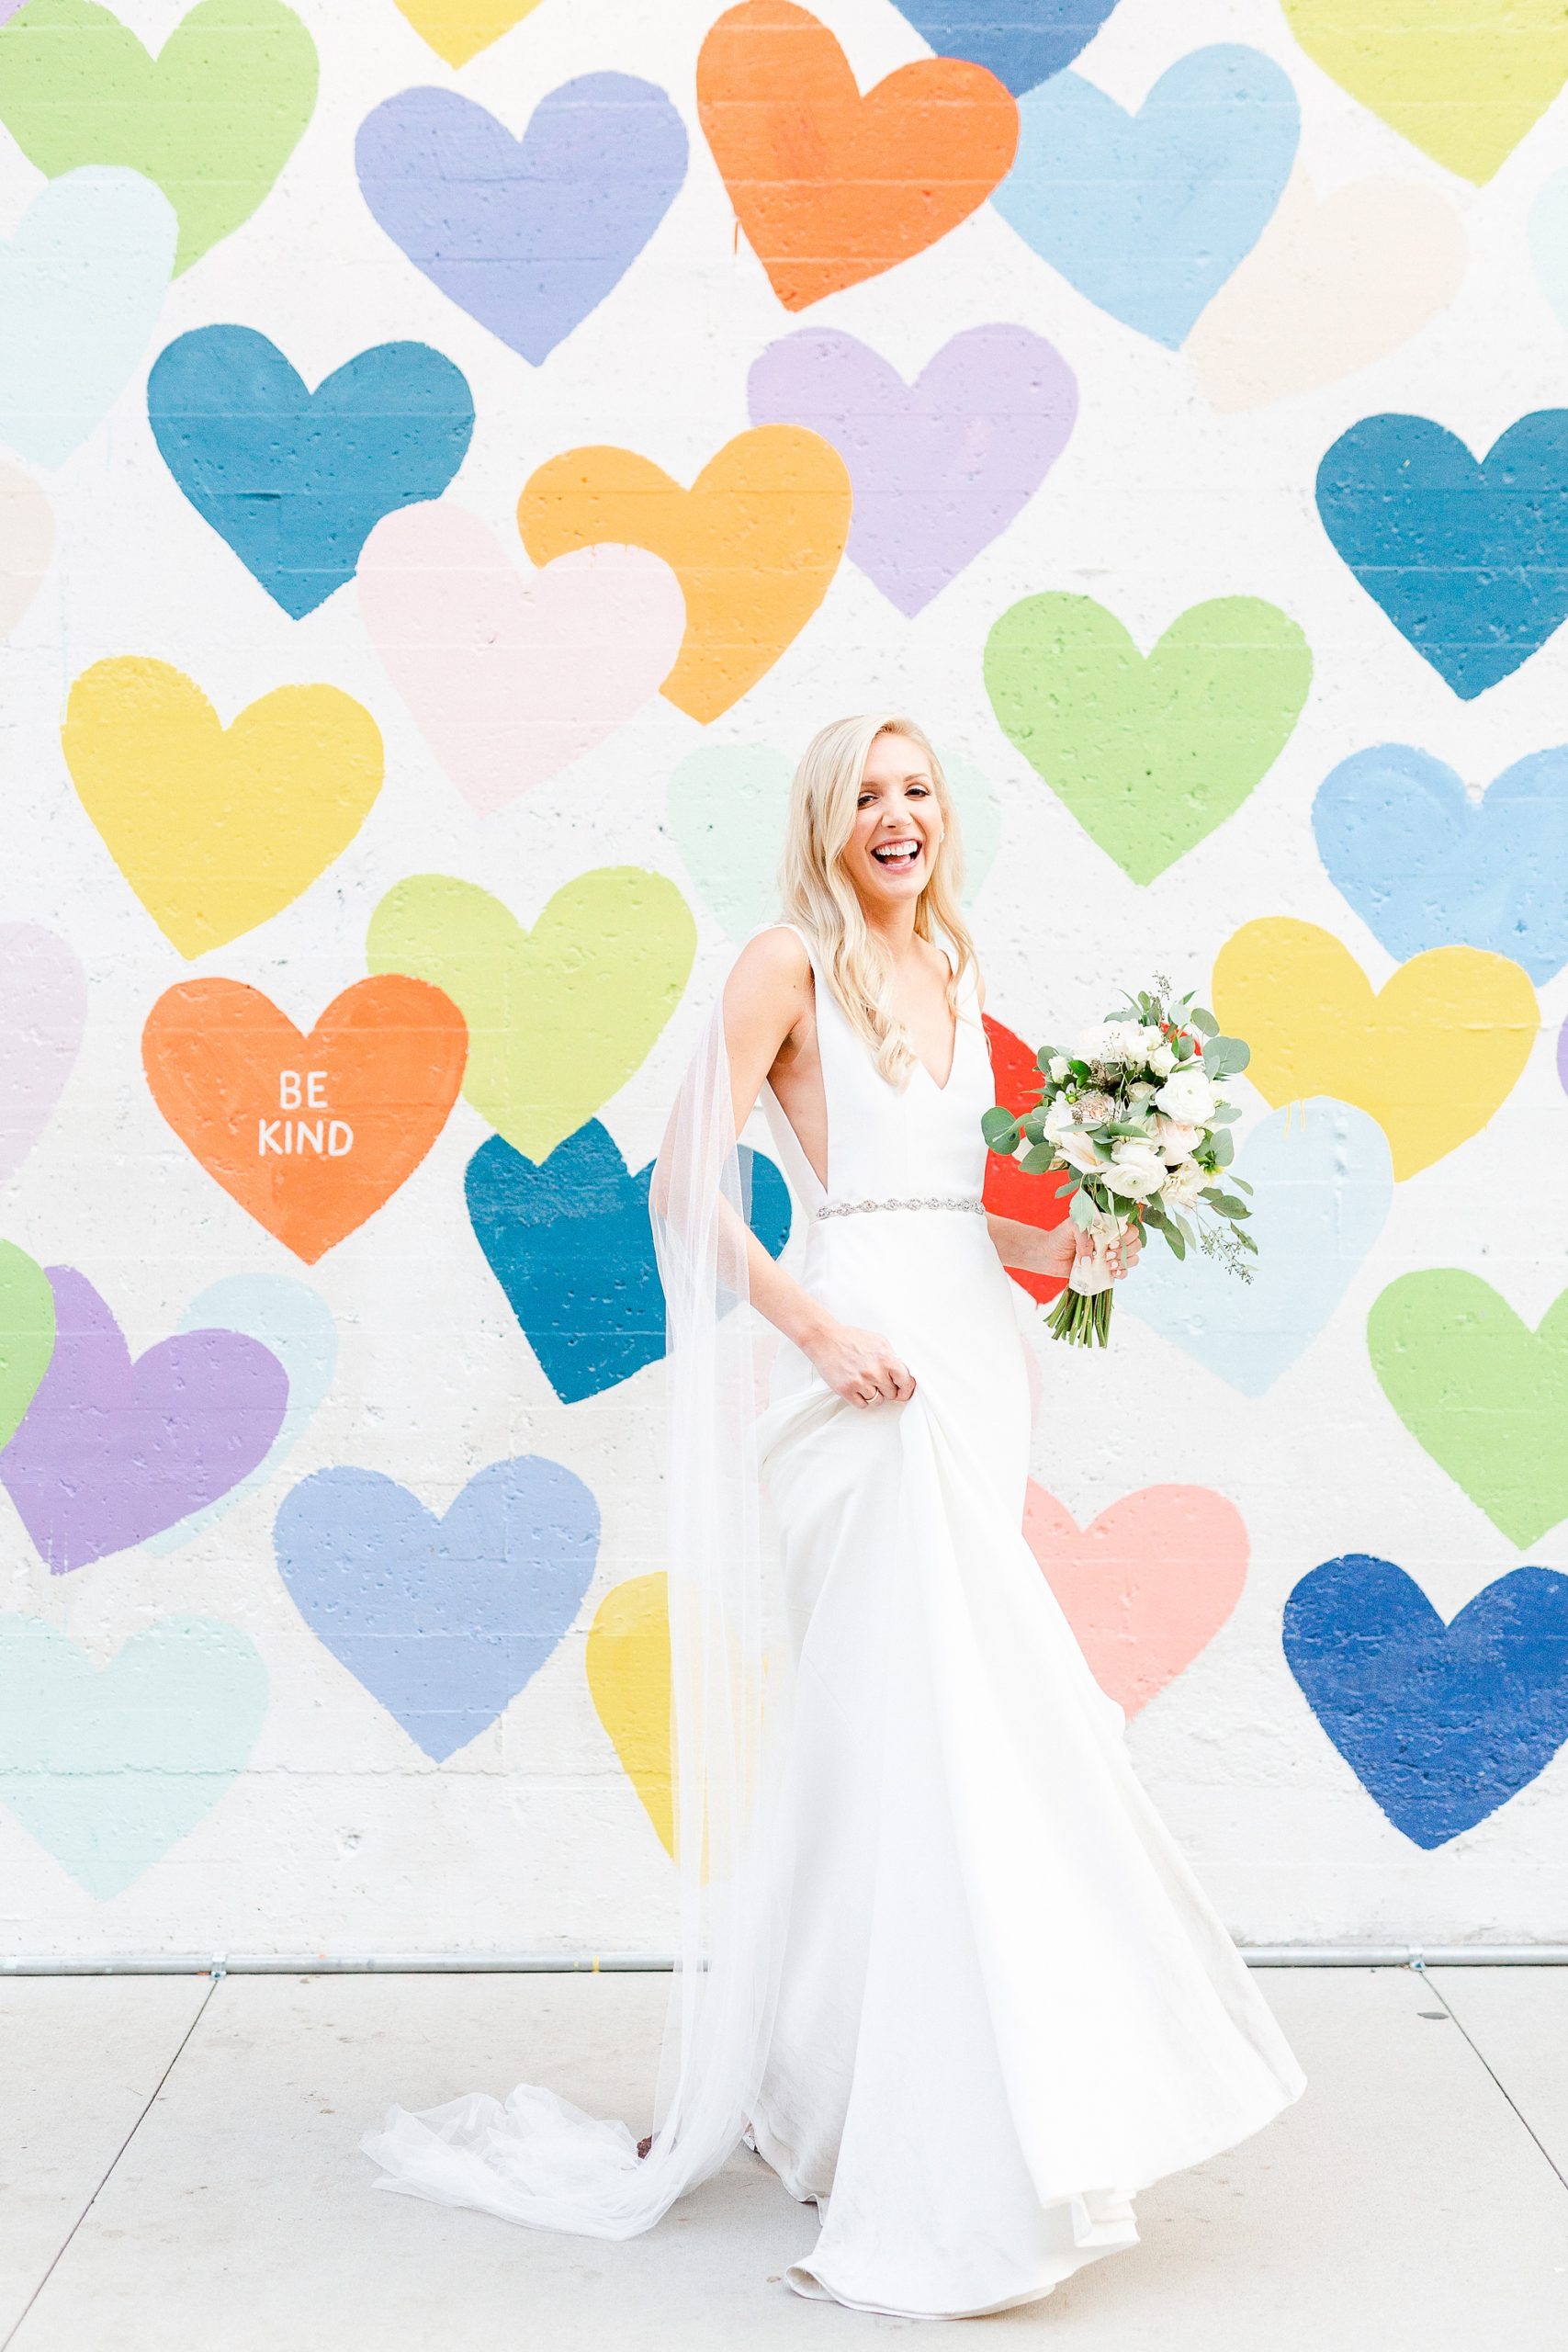 bride twirls wedding gown during portraits by heart mural